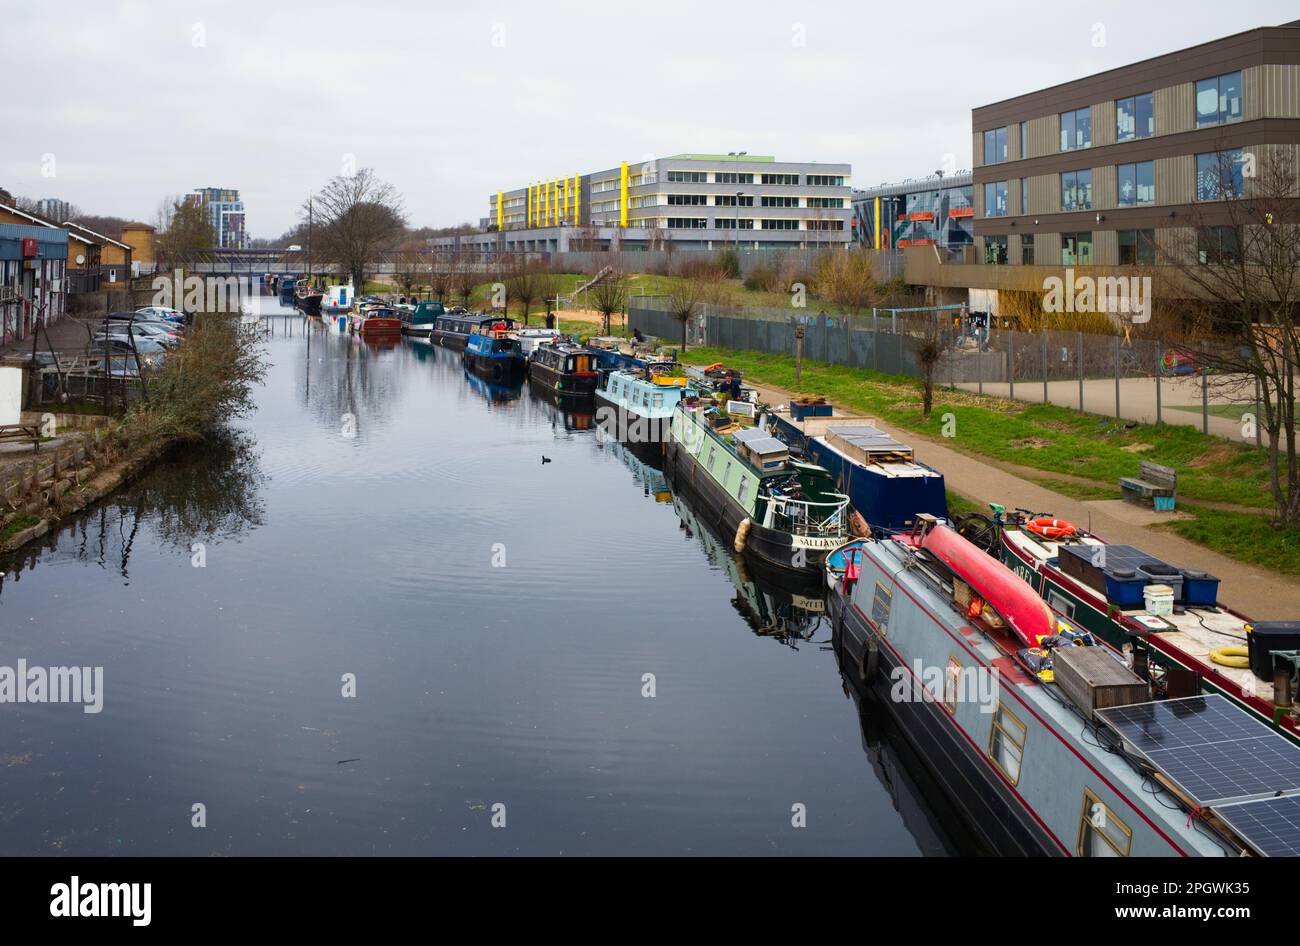 Canal boats moored at Hackney Wick on the Hertford Union Canal Stock Photo